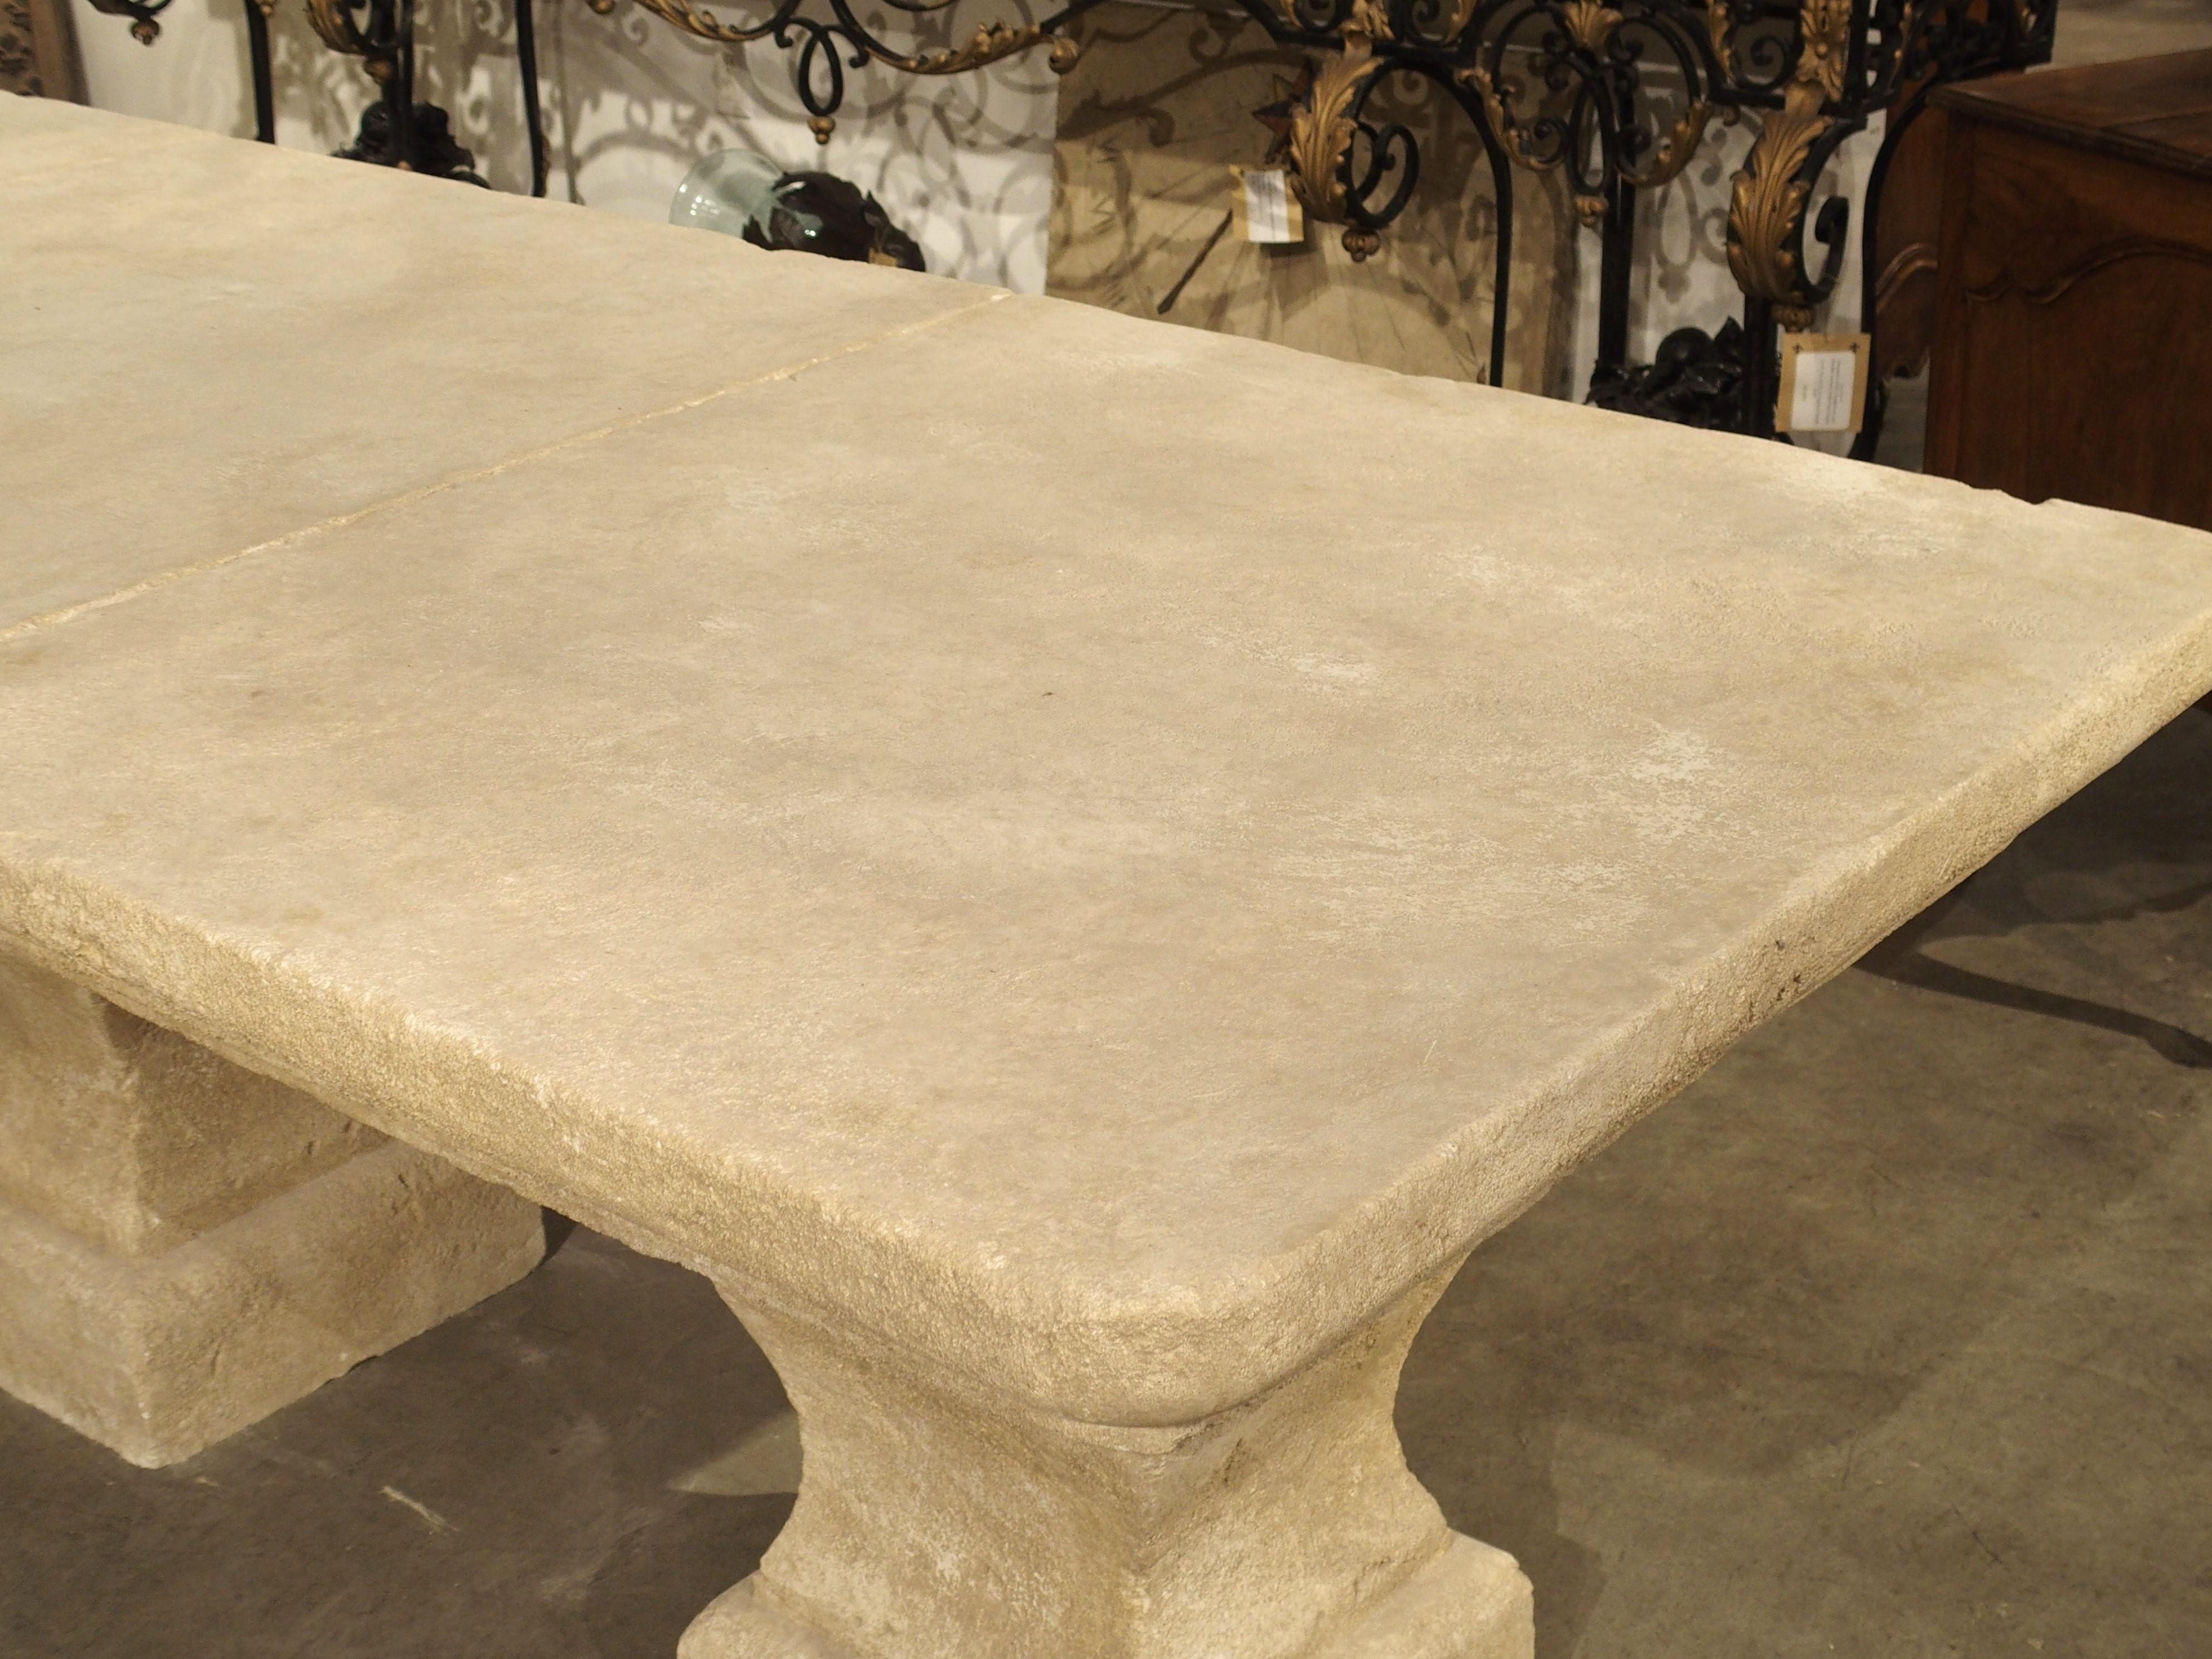 Hand-Carved Carved 3-Section Limestone Dining Table from Provence, France